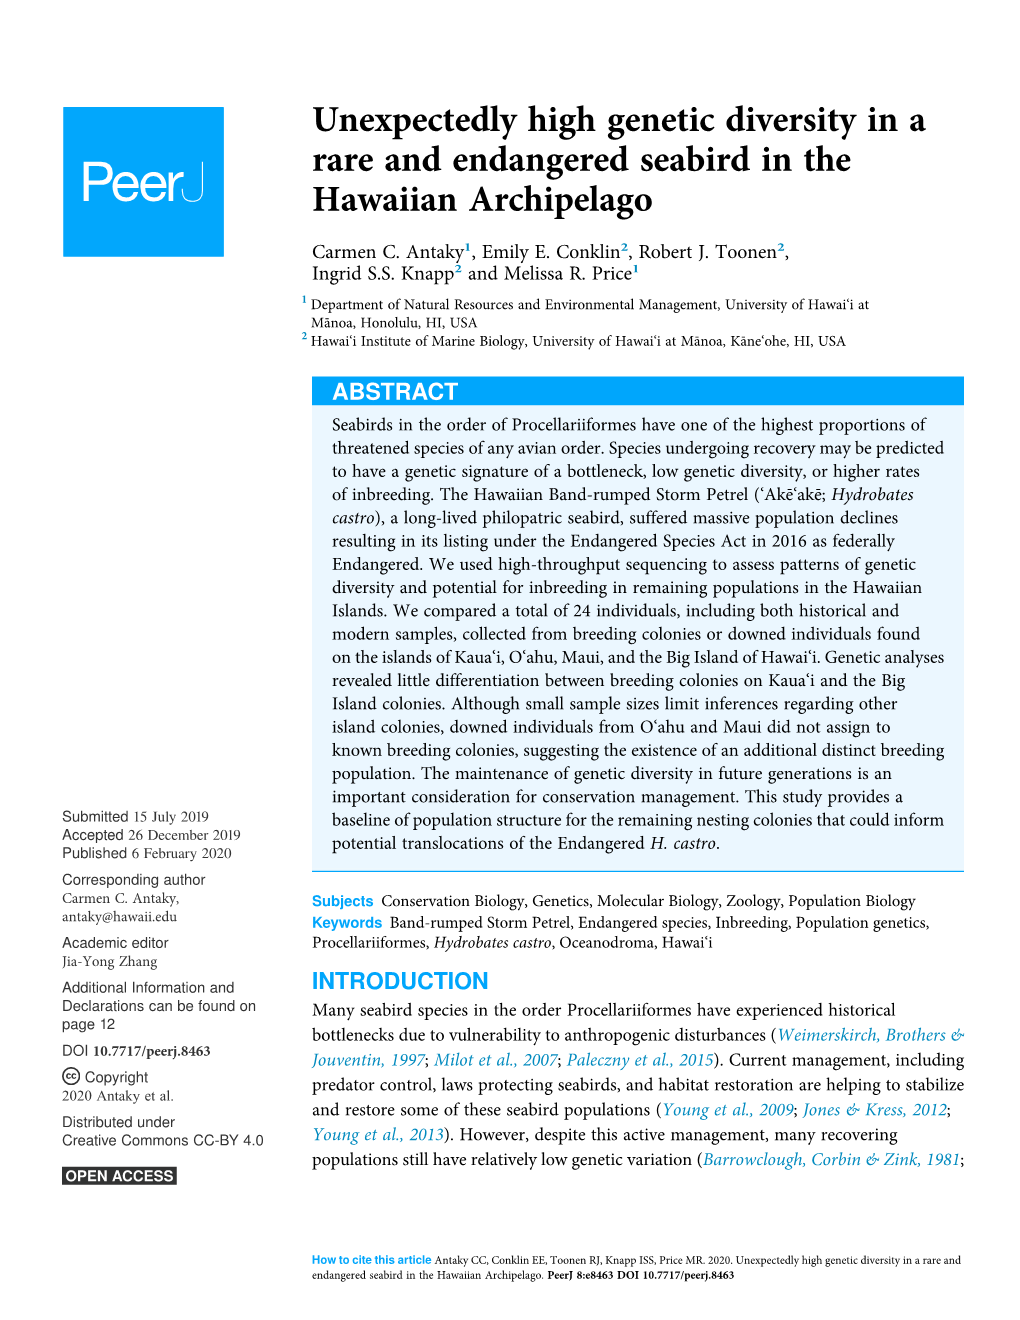 Unexpectedly High Genetic Diversity in a Rare and Endangered Seabird in the Hawaiian Archipelago